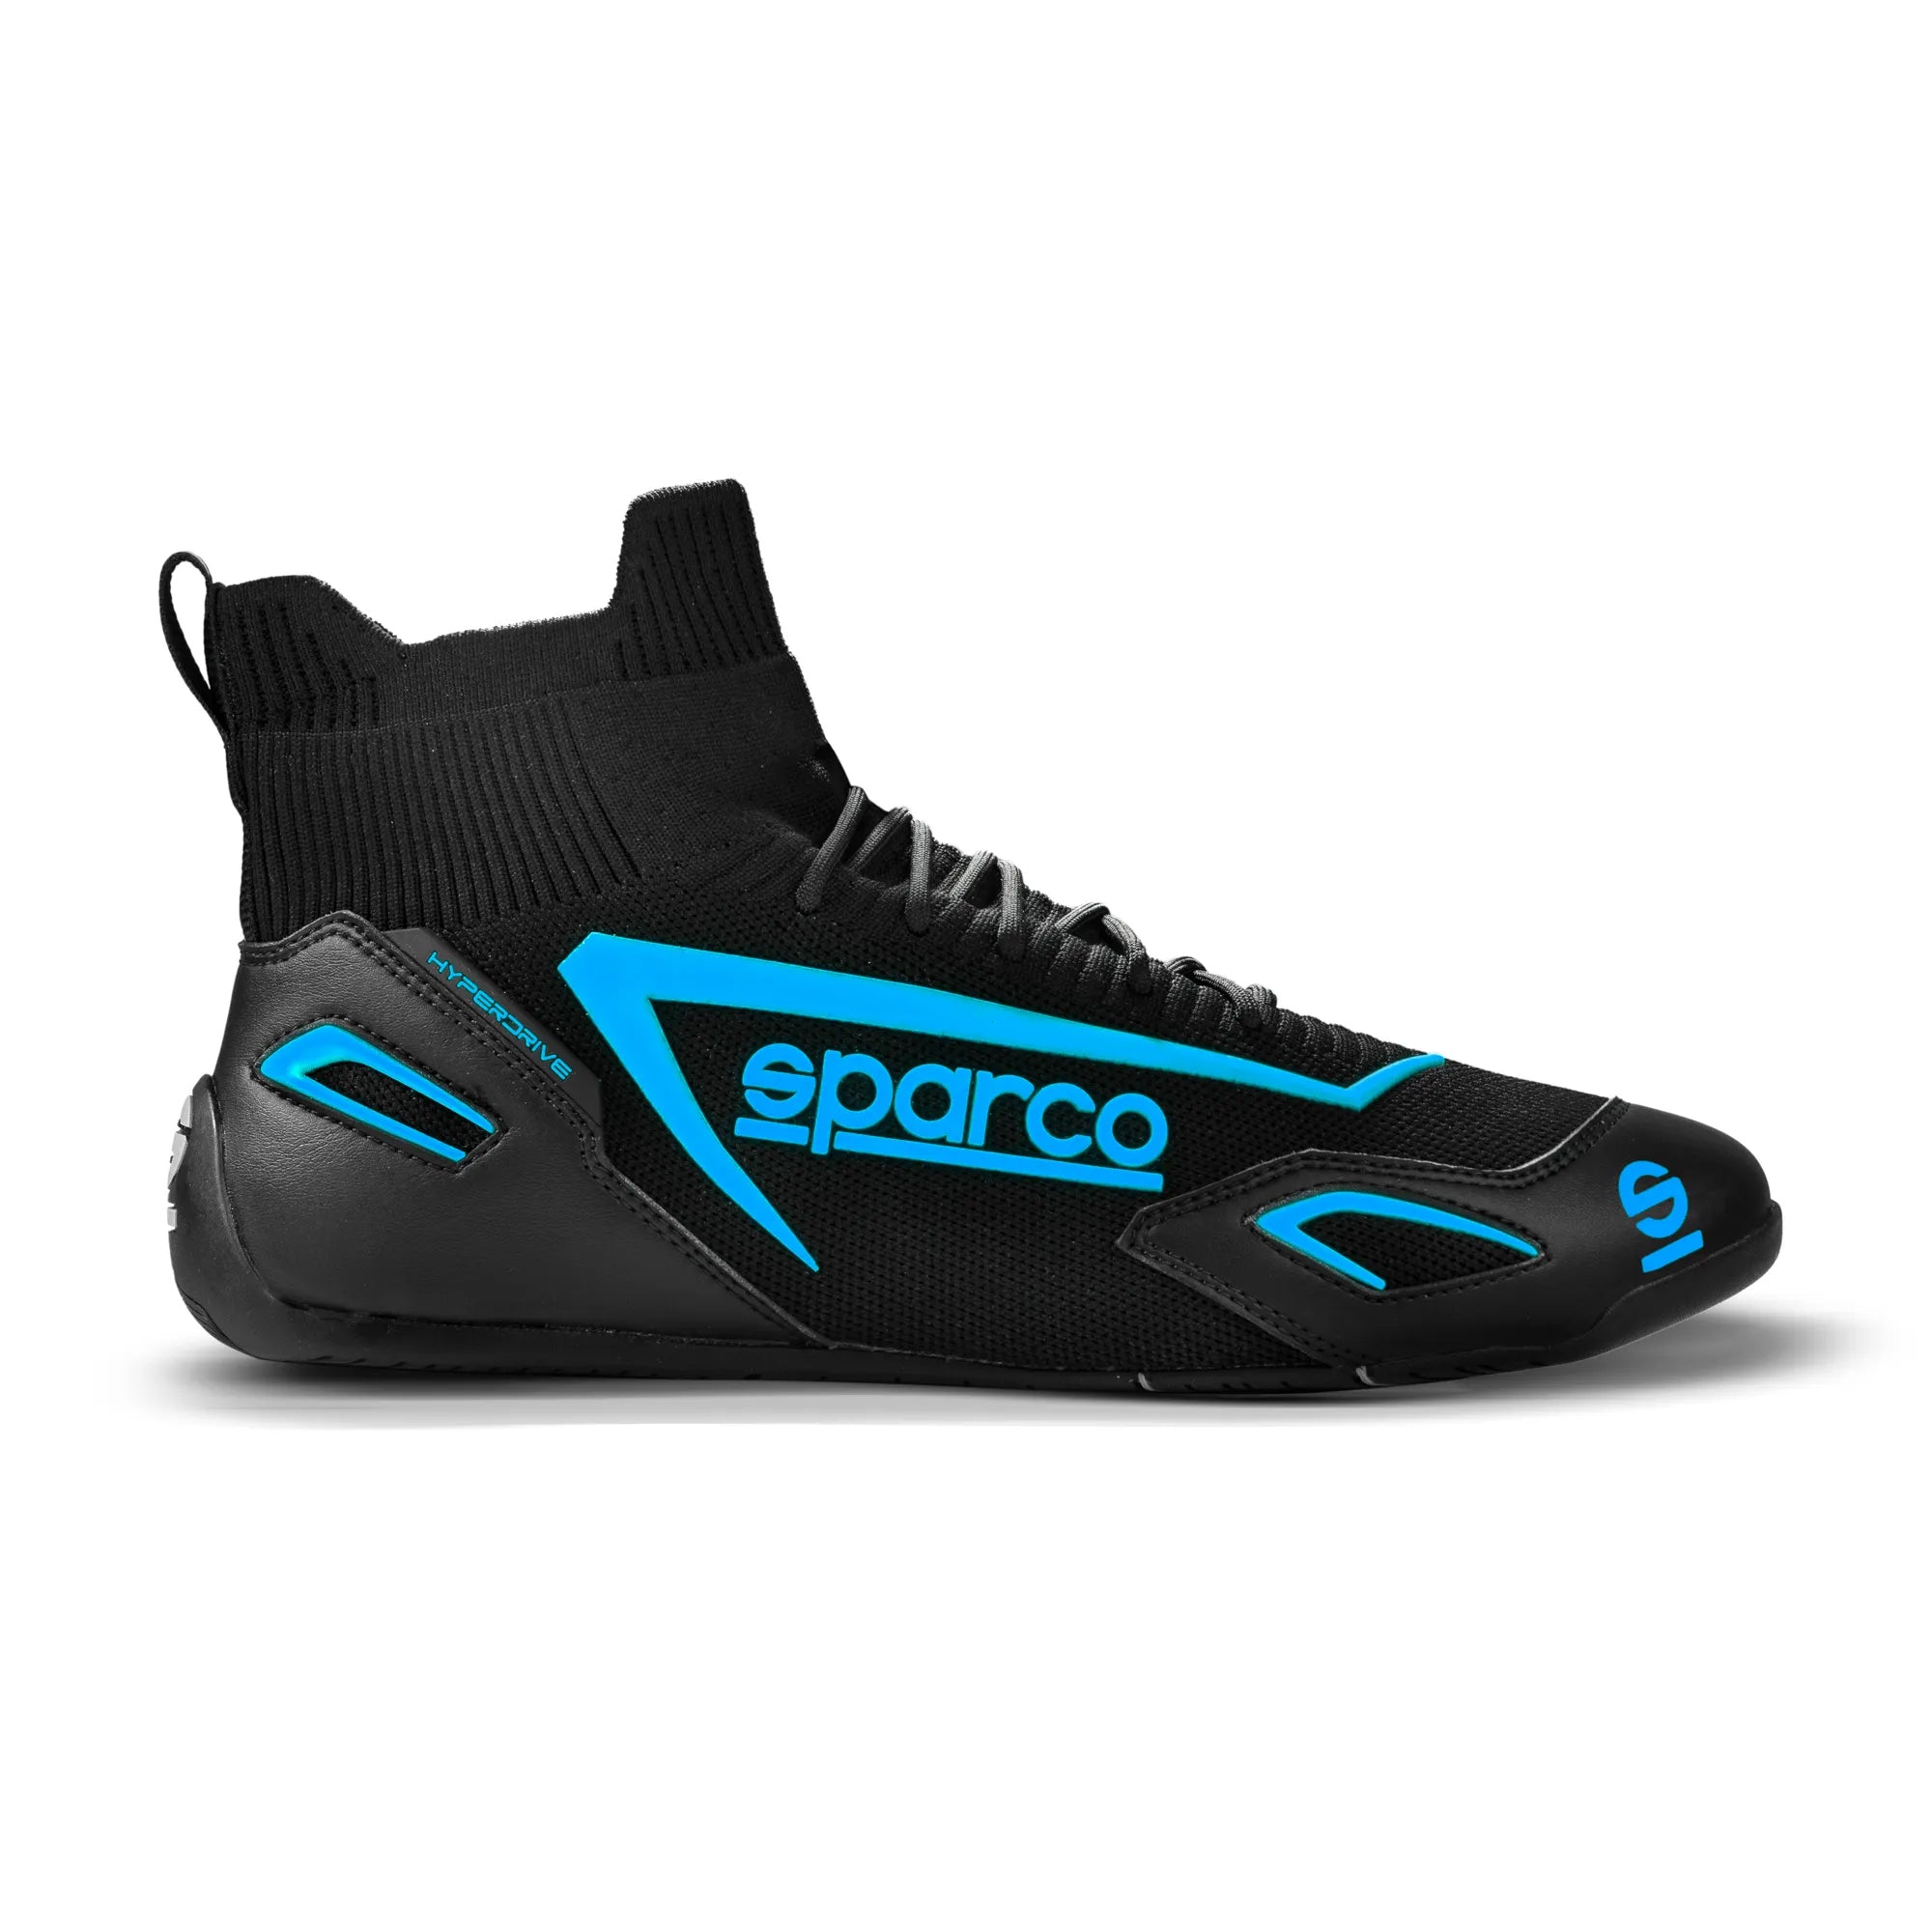 SPARCO 00129344NRAZ Gaming sim racing shoes HYPERDRIVE, black/blue, size 44 Photo-0 